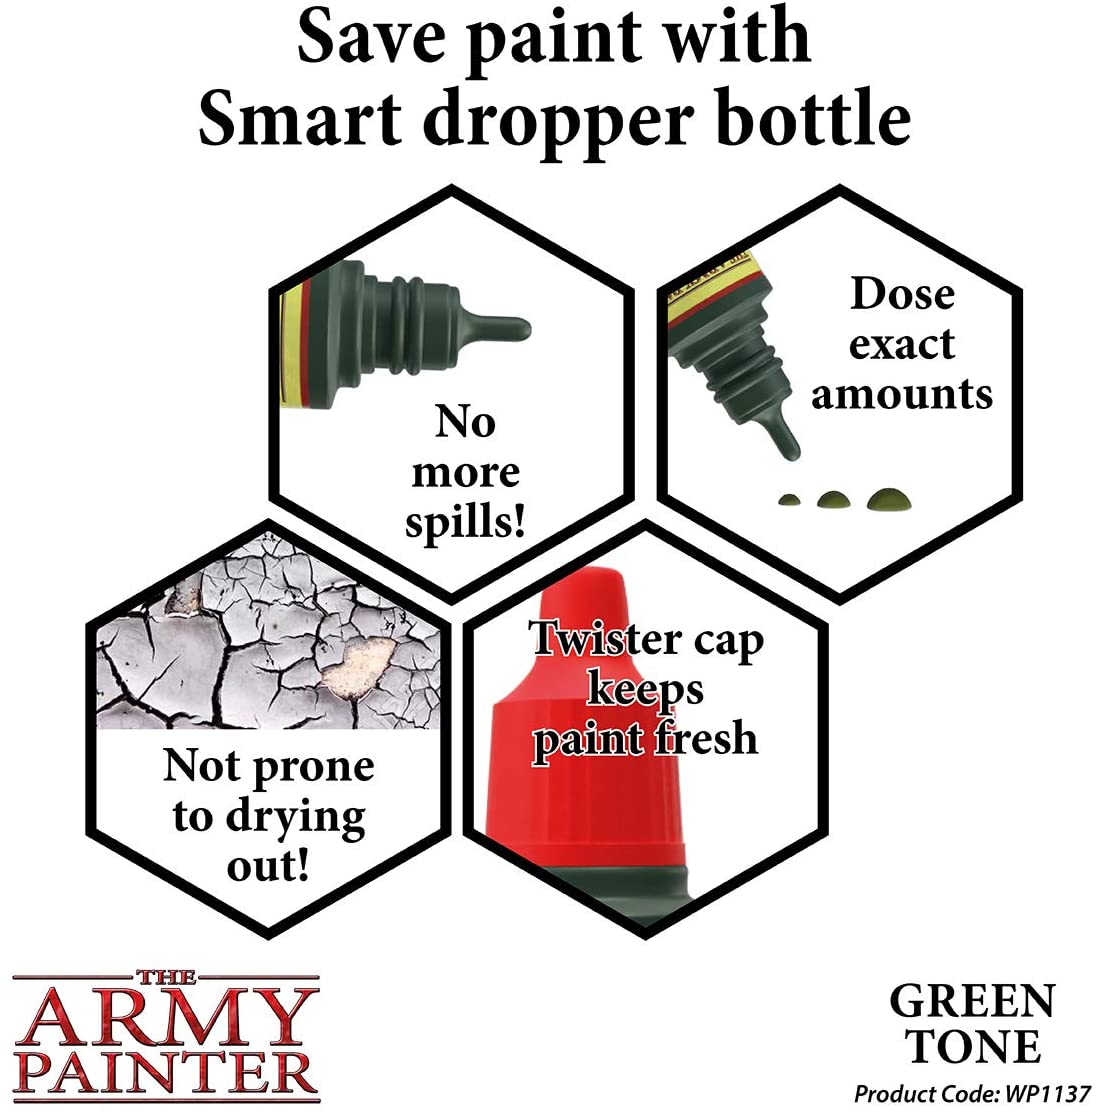 The Army Painter - Quickshade Washes: Green Tone (18ml/0.6oz)